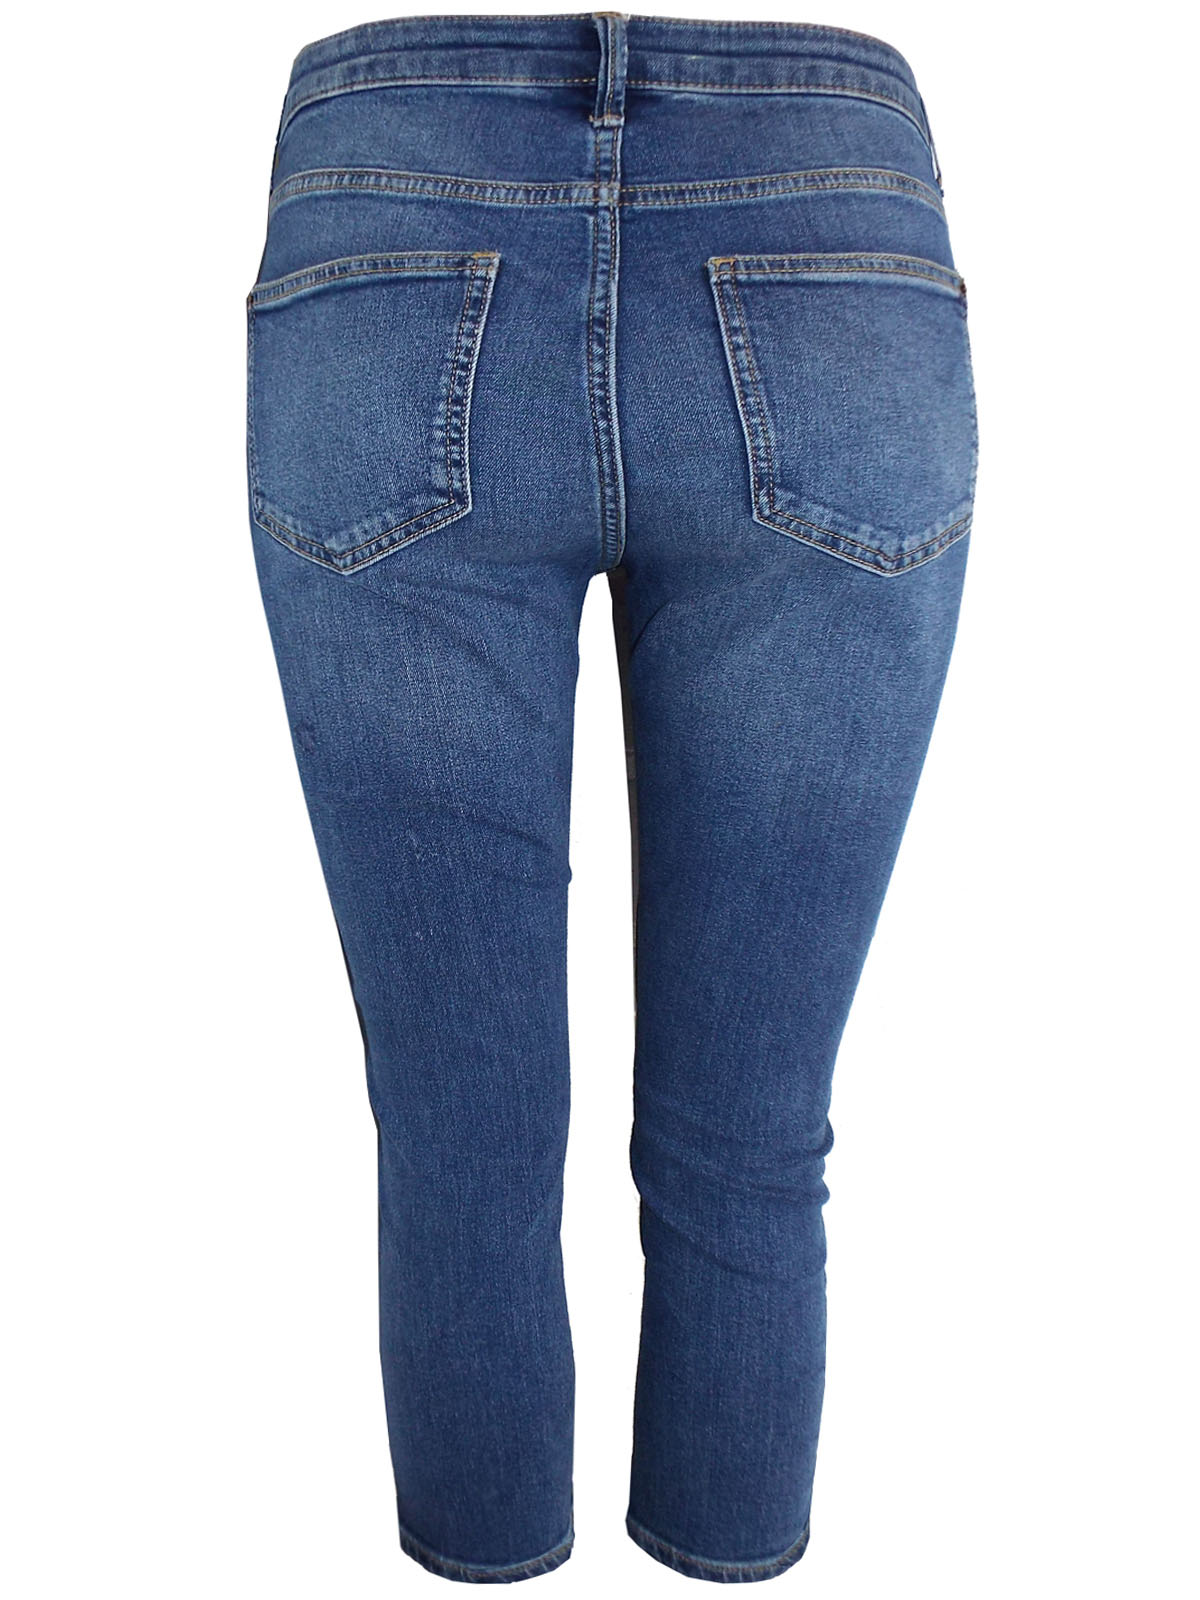 Marks and Spencer - - M&5 Bright INDIGO Mid Rise Cropped Super Skinny ...